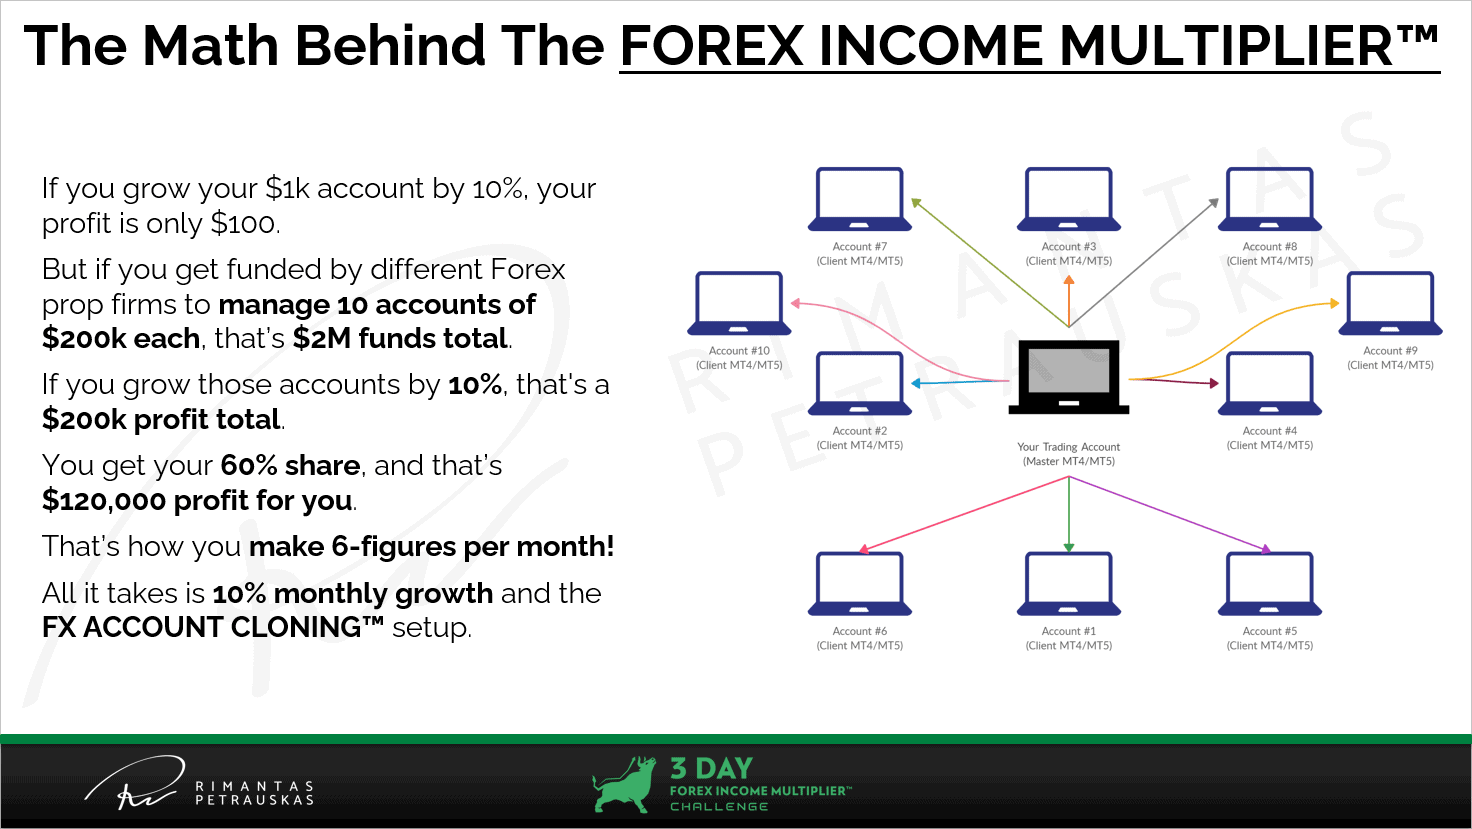 The math behind the Forex Income Multiplier™ framework